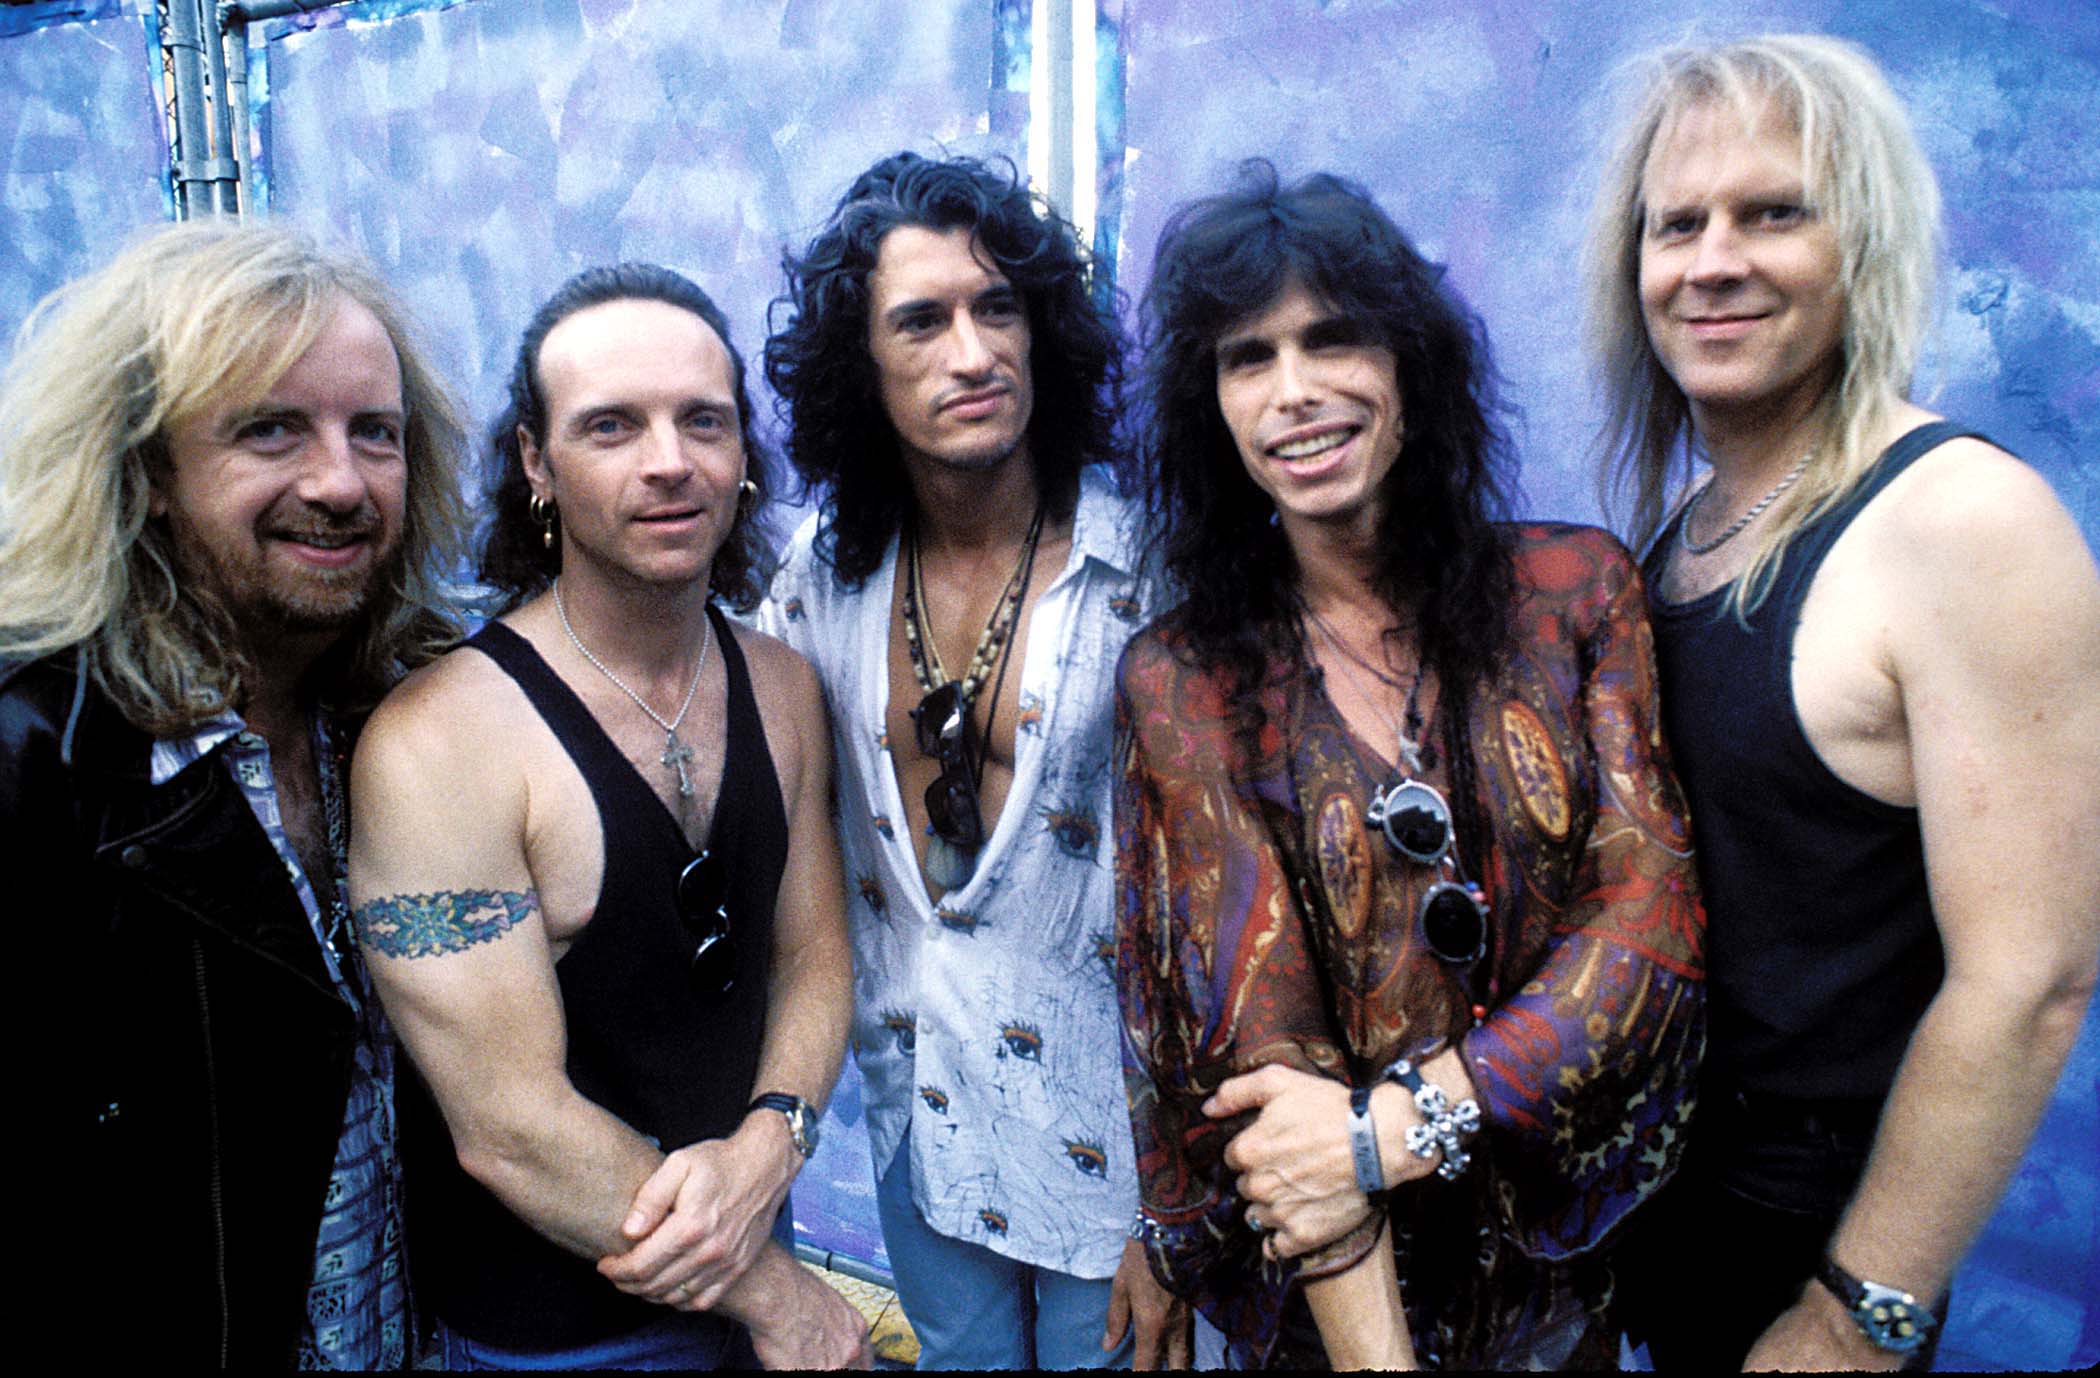 How Aerosmith's Only No. 1 Hit Led a Country Singer to Leave His Label